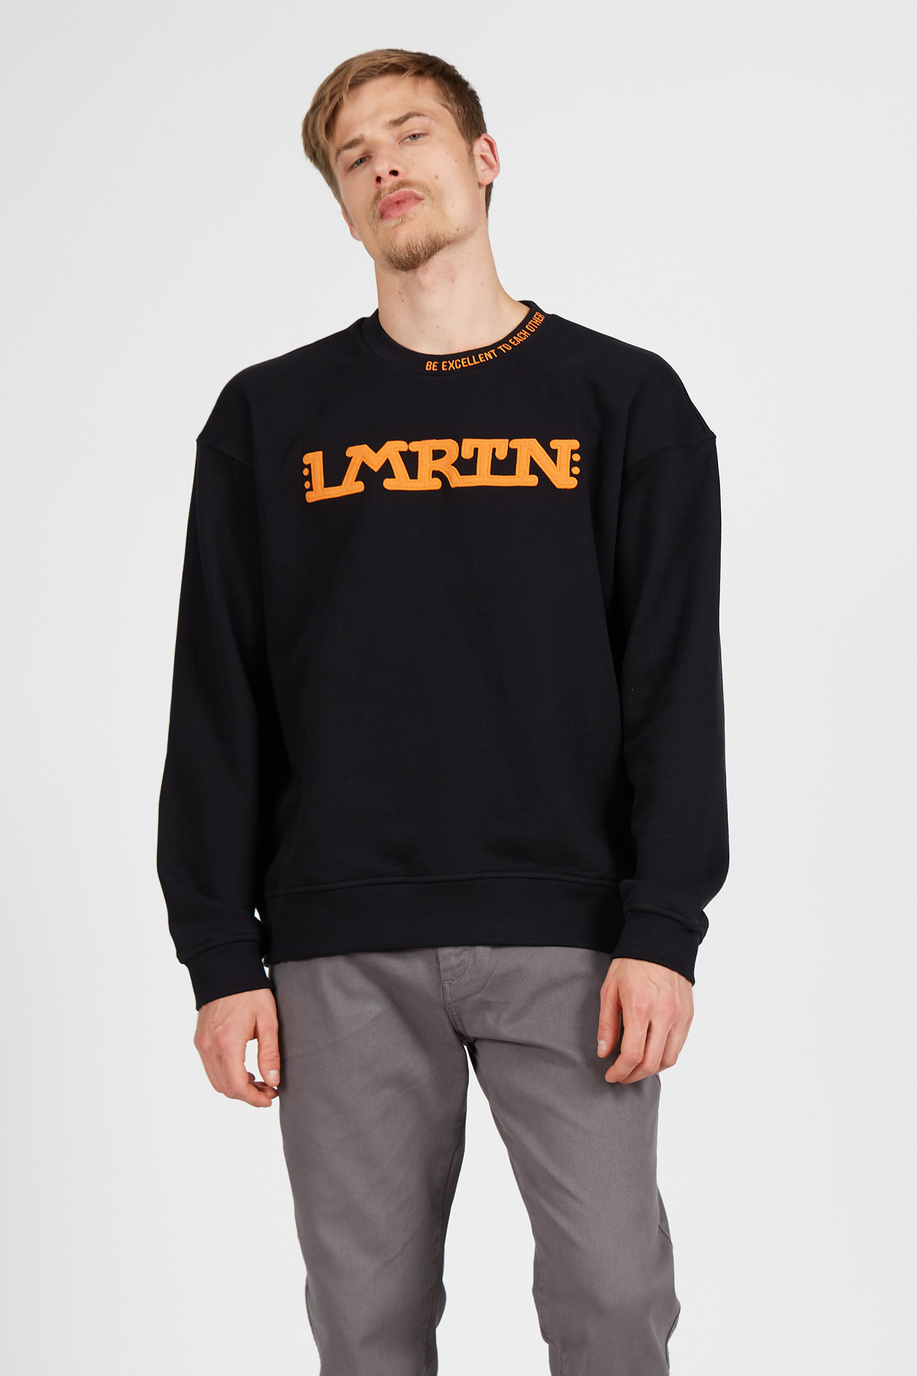 Men's sweatshirt in 100% cotton with long sleeves, oversized fit - test | La Martina - Official Online Shop